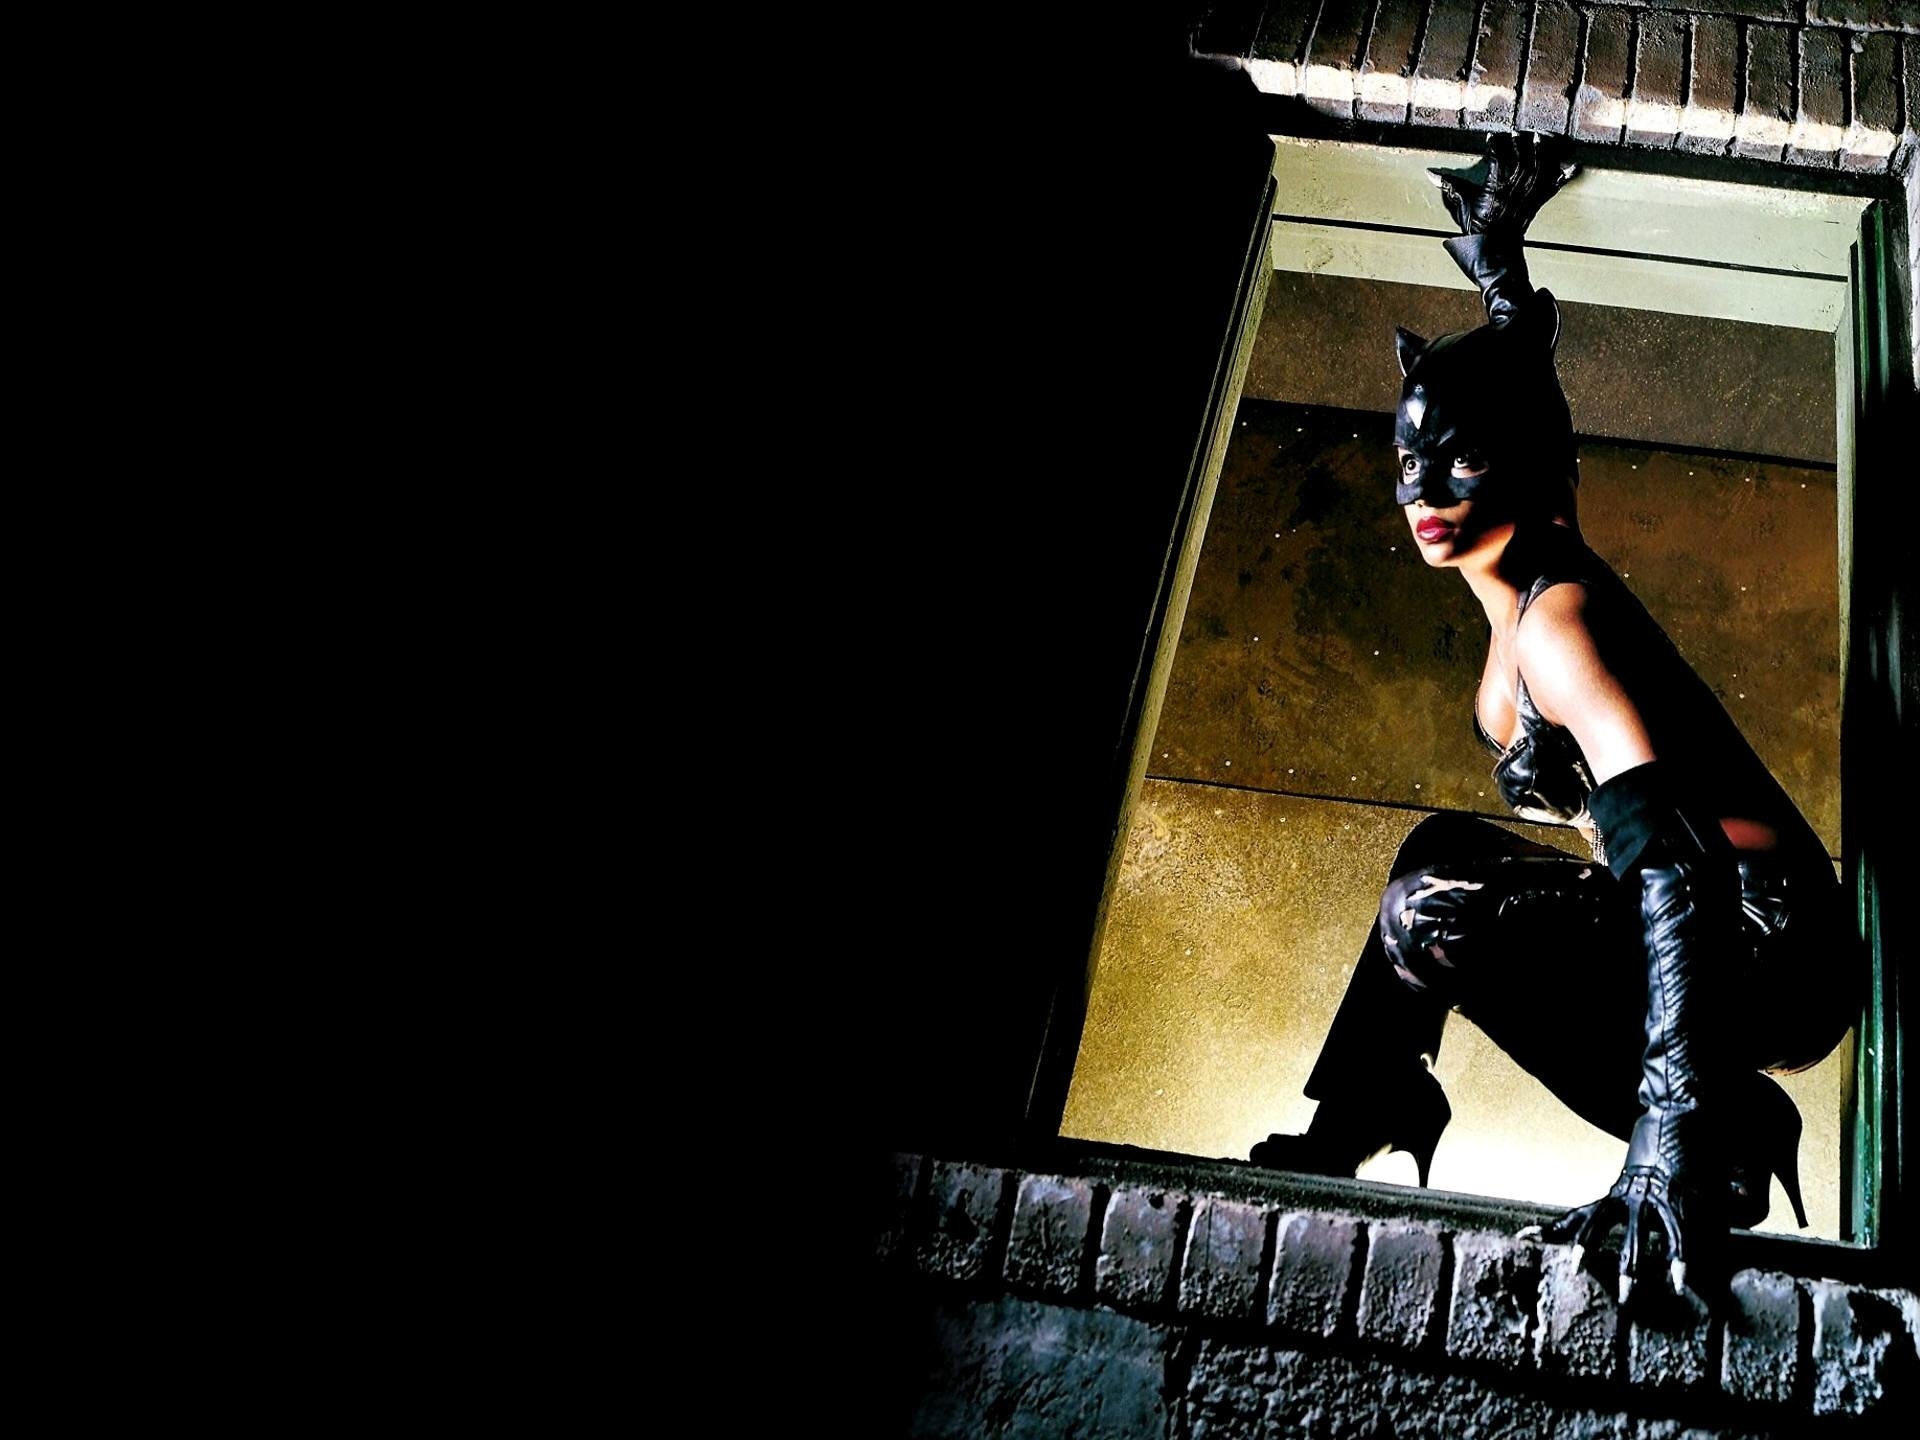 Catwoman (Halle Berry), Halle Berry's portrayal, Iconic celebrity, Actress in costume, 1920x1440 HD Desktop